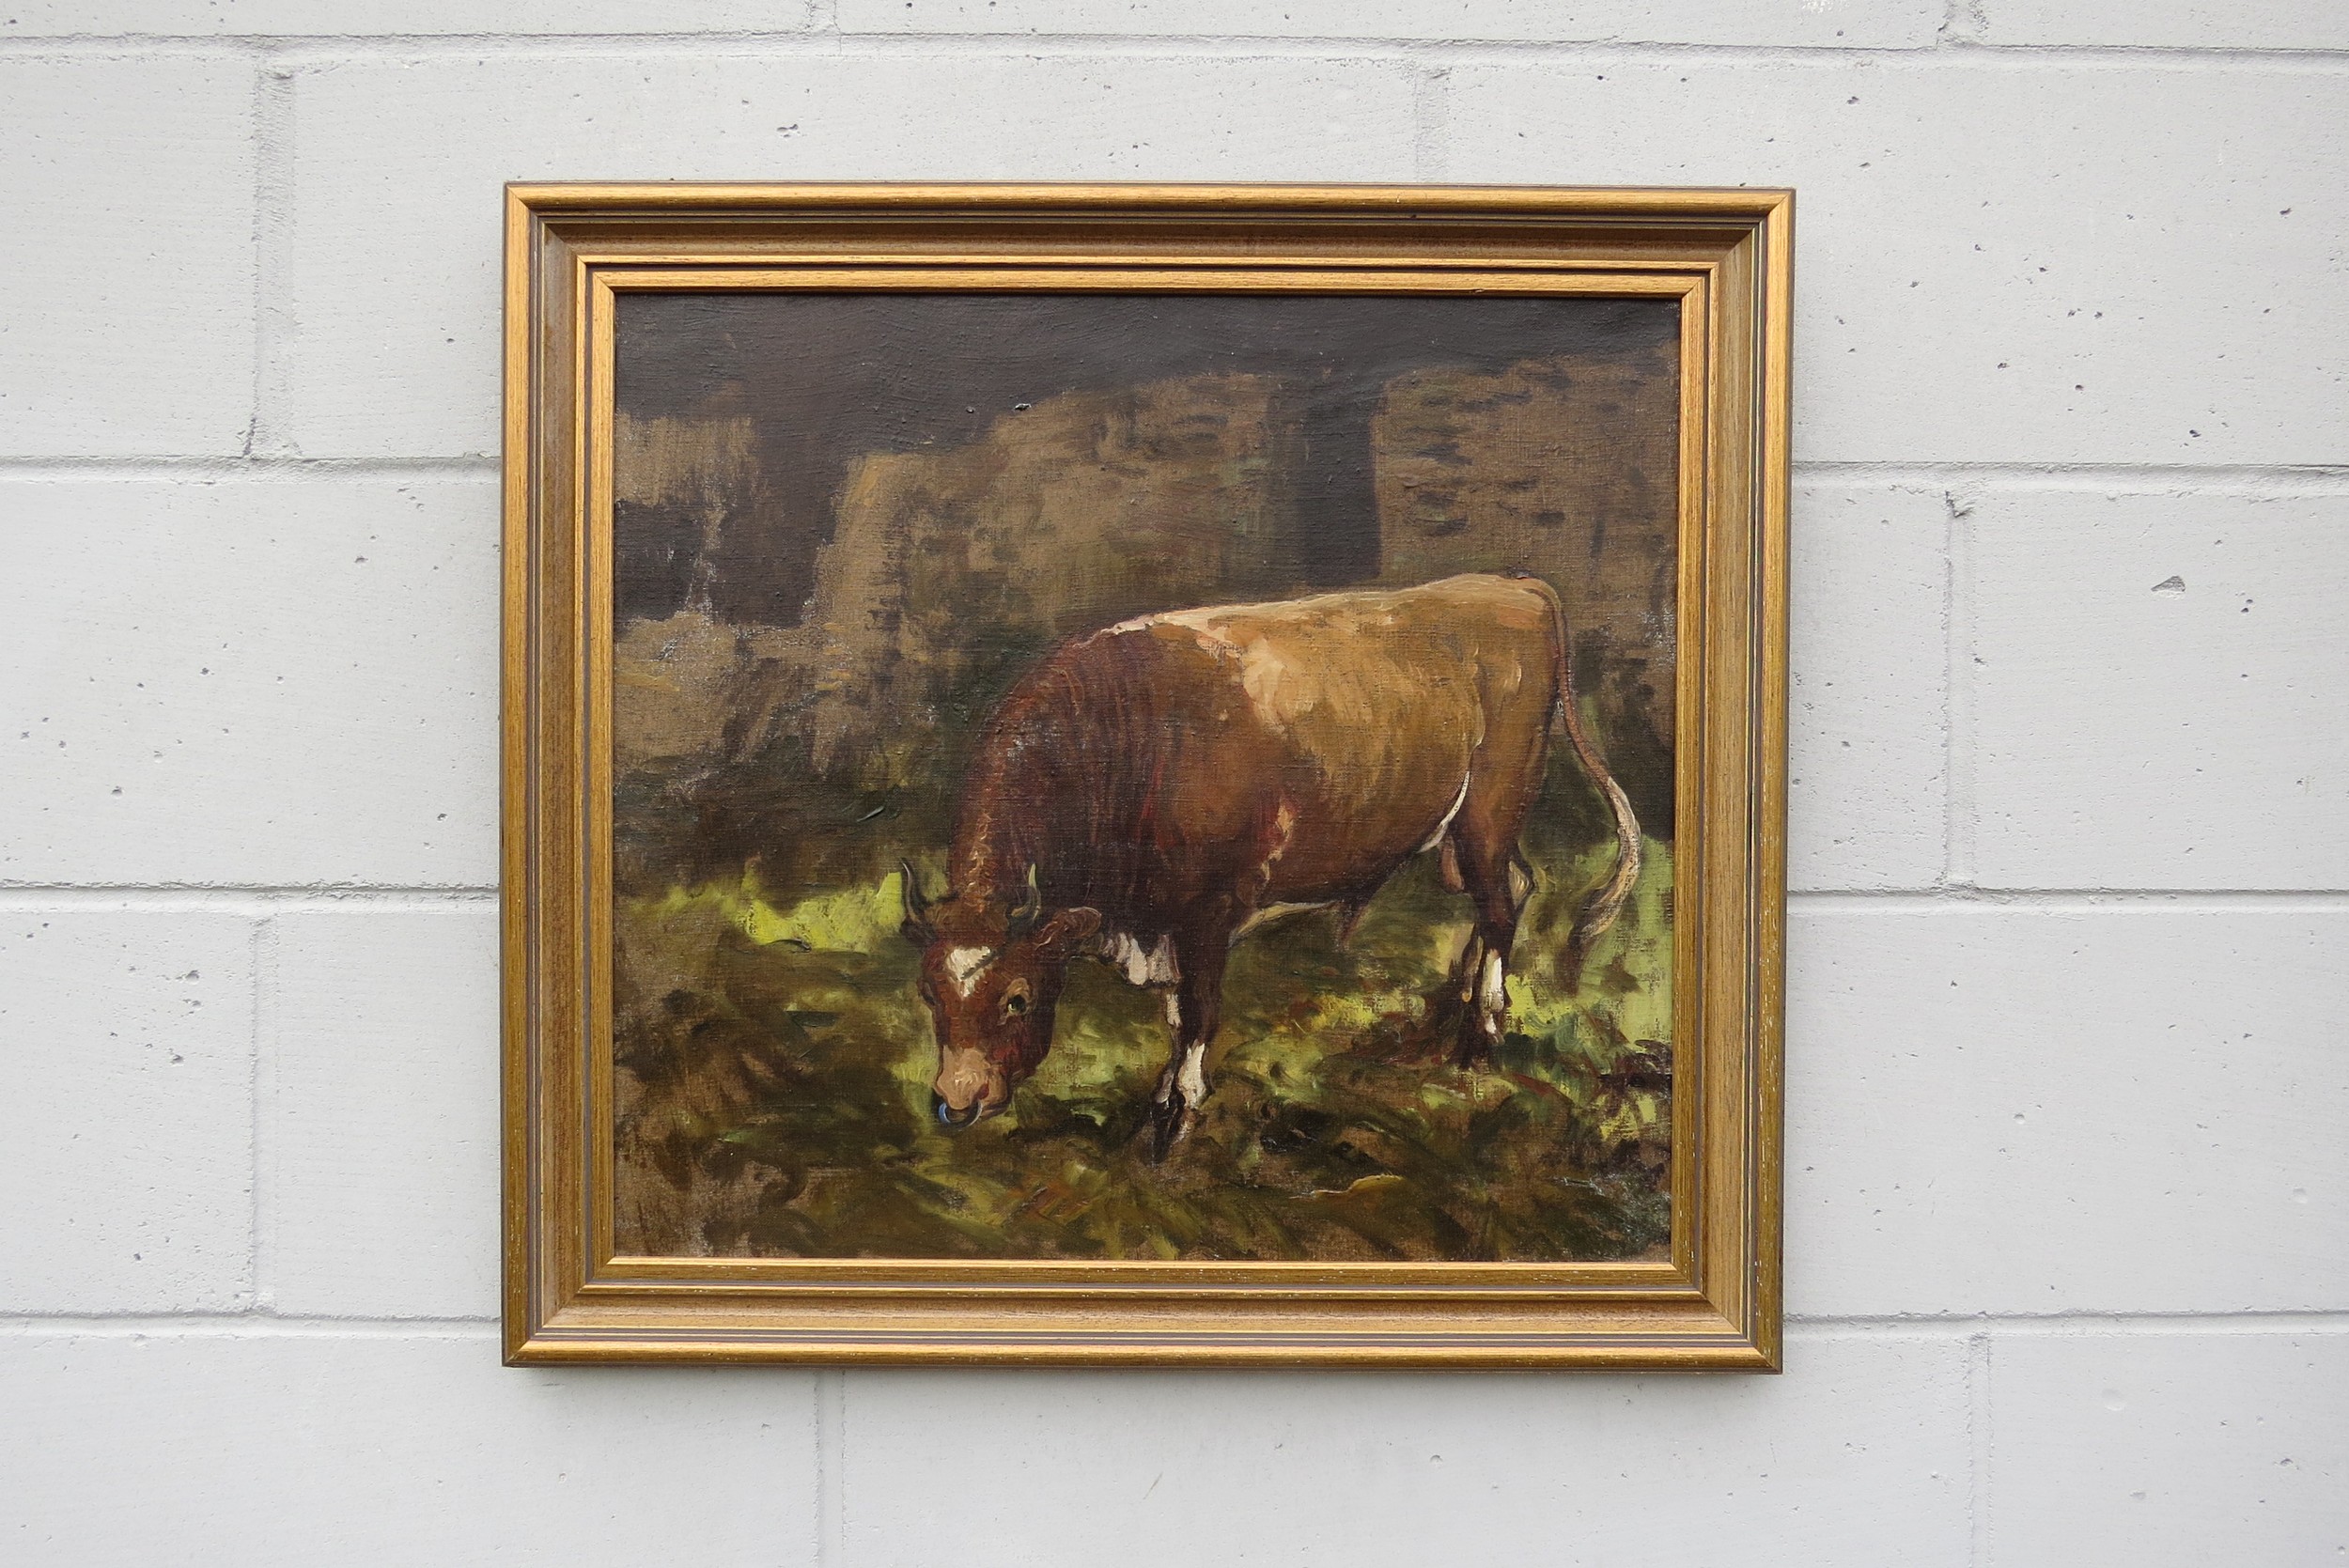 Attributed to Alexander Jamieson (1873-1937) An oil on canvas of a Shorthorn Bull. Unsigned. Label